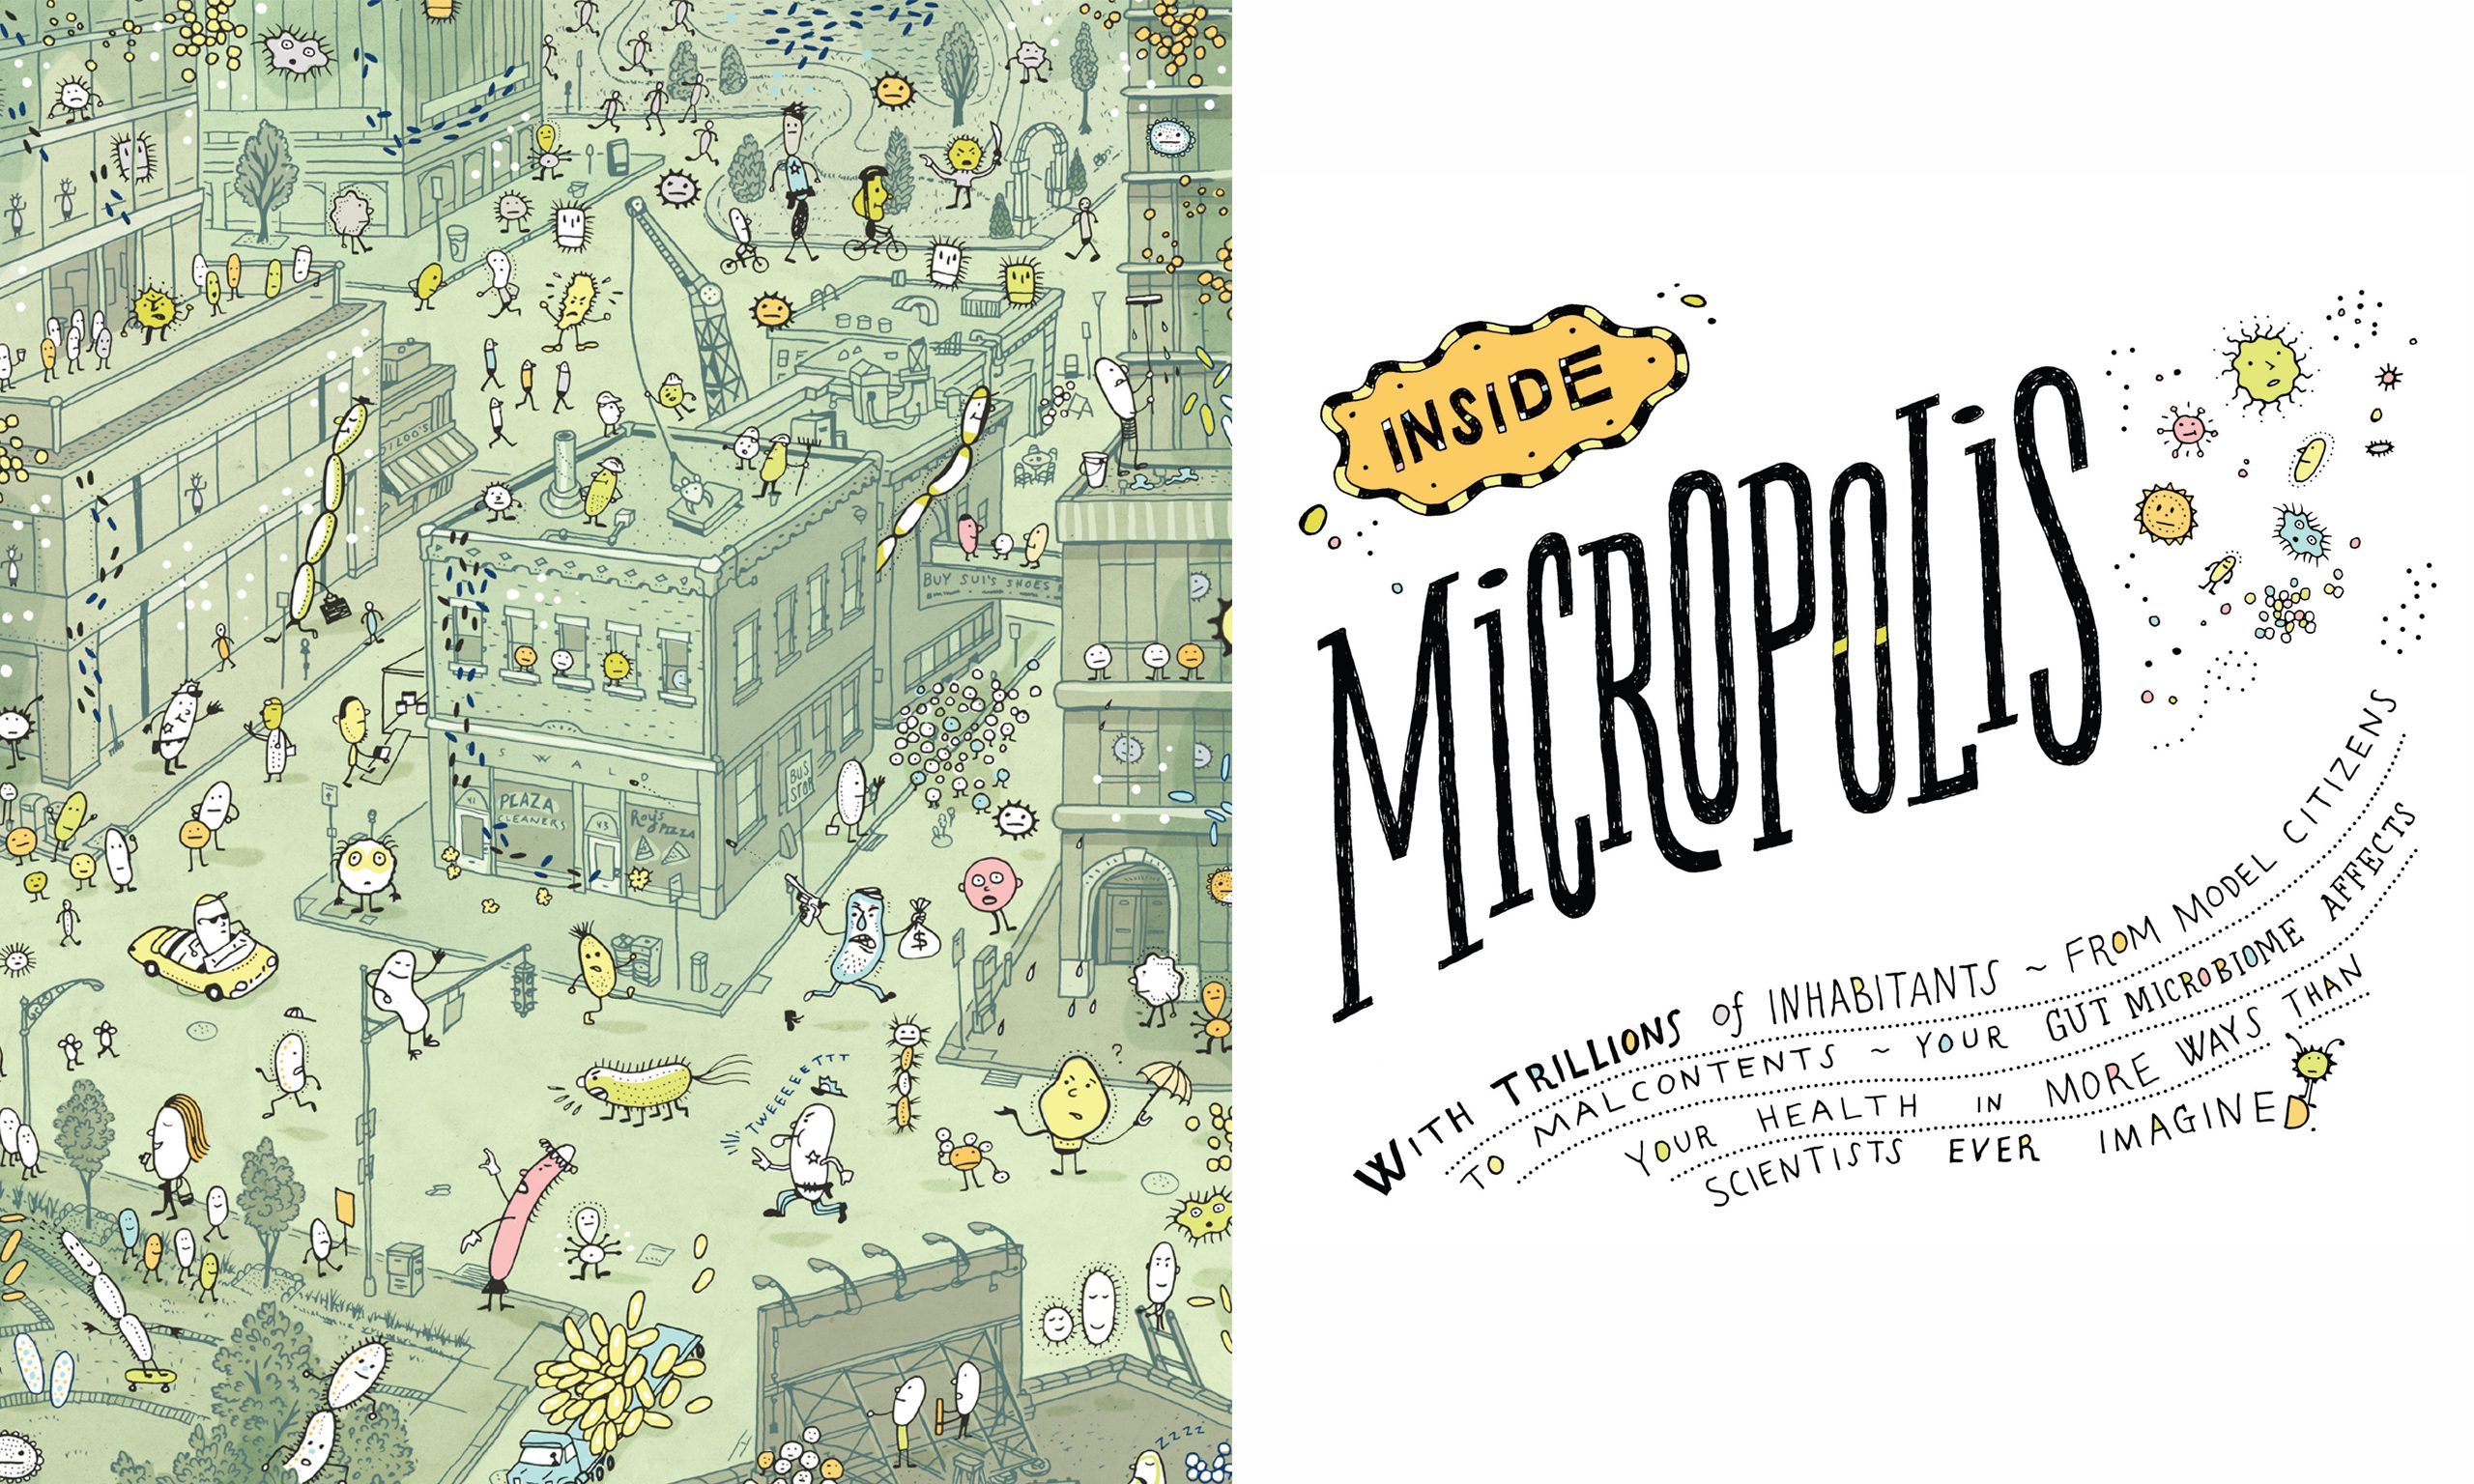 Illustration of a city filled with anthropomorphic bacteria and the article title "Inside Micropolis" and a description "With trillions of inhabitants—from model citizens to malcontents—your gut microbiome affects your health in more ways than scientists ever imagined."